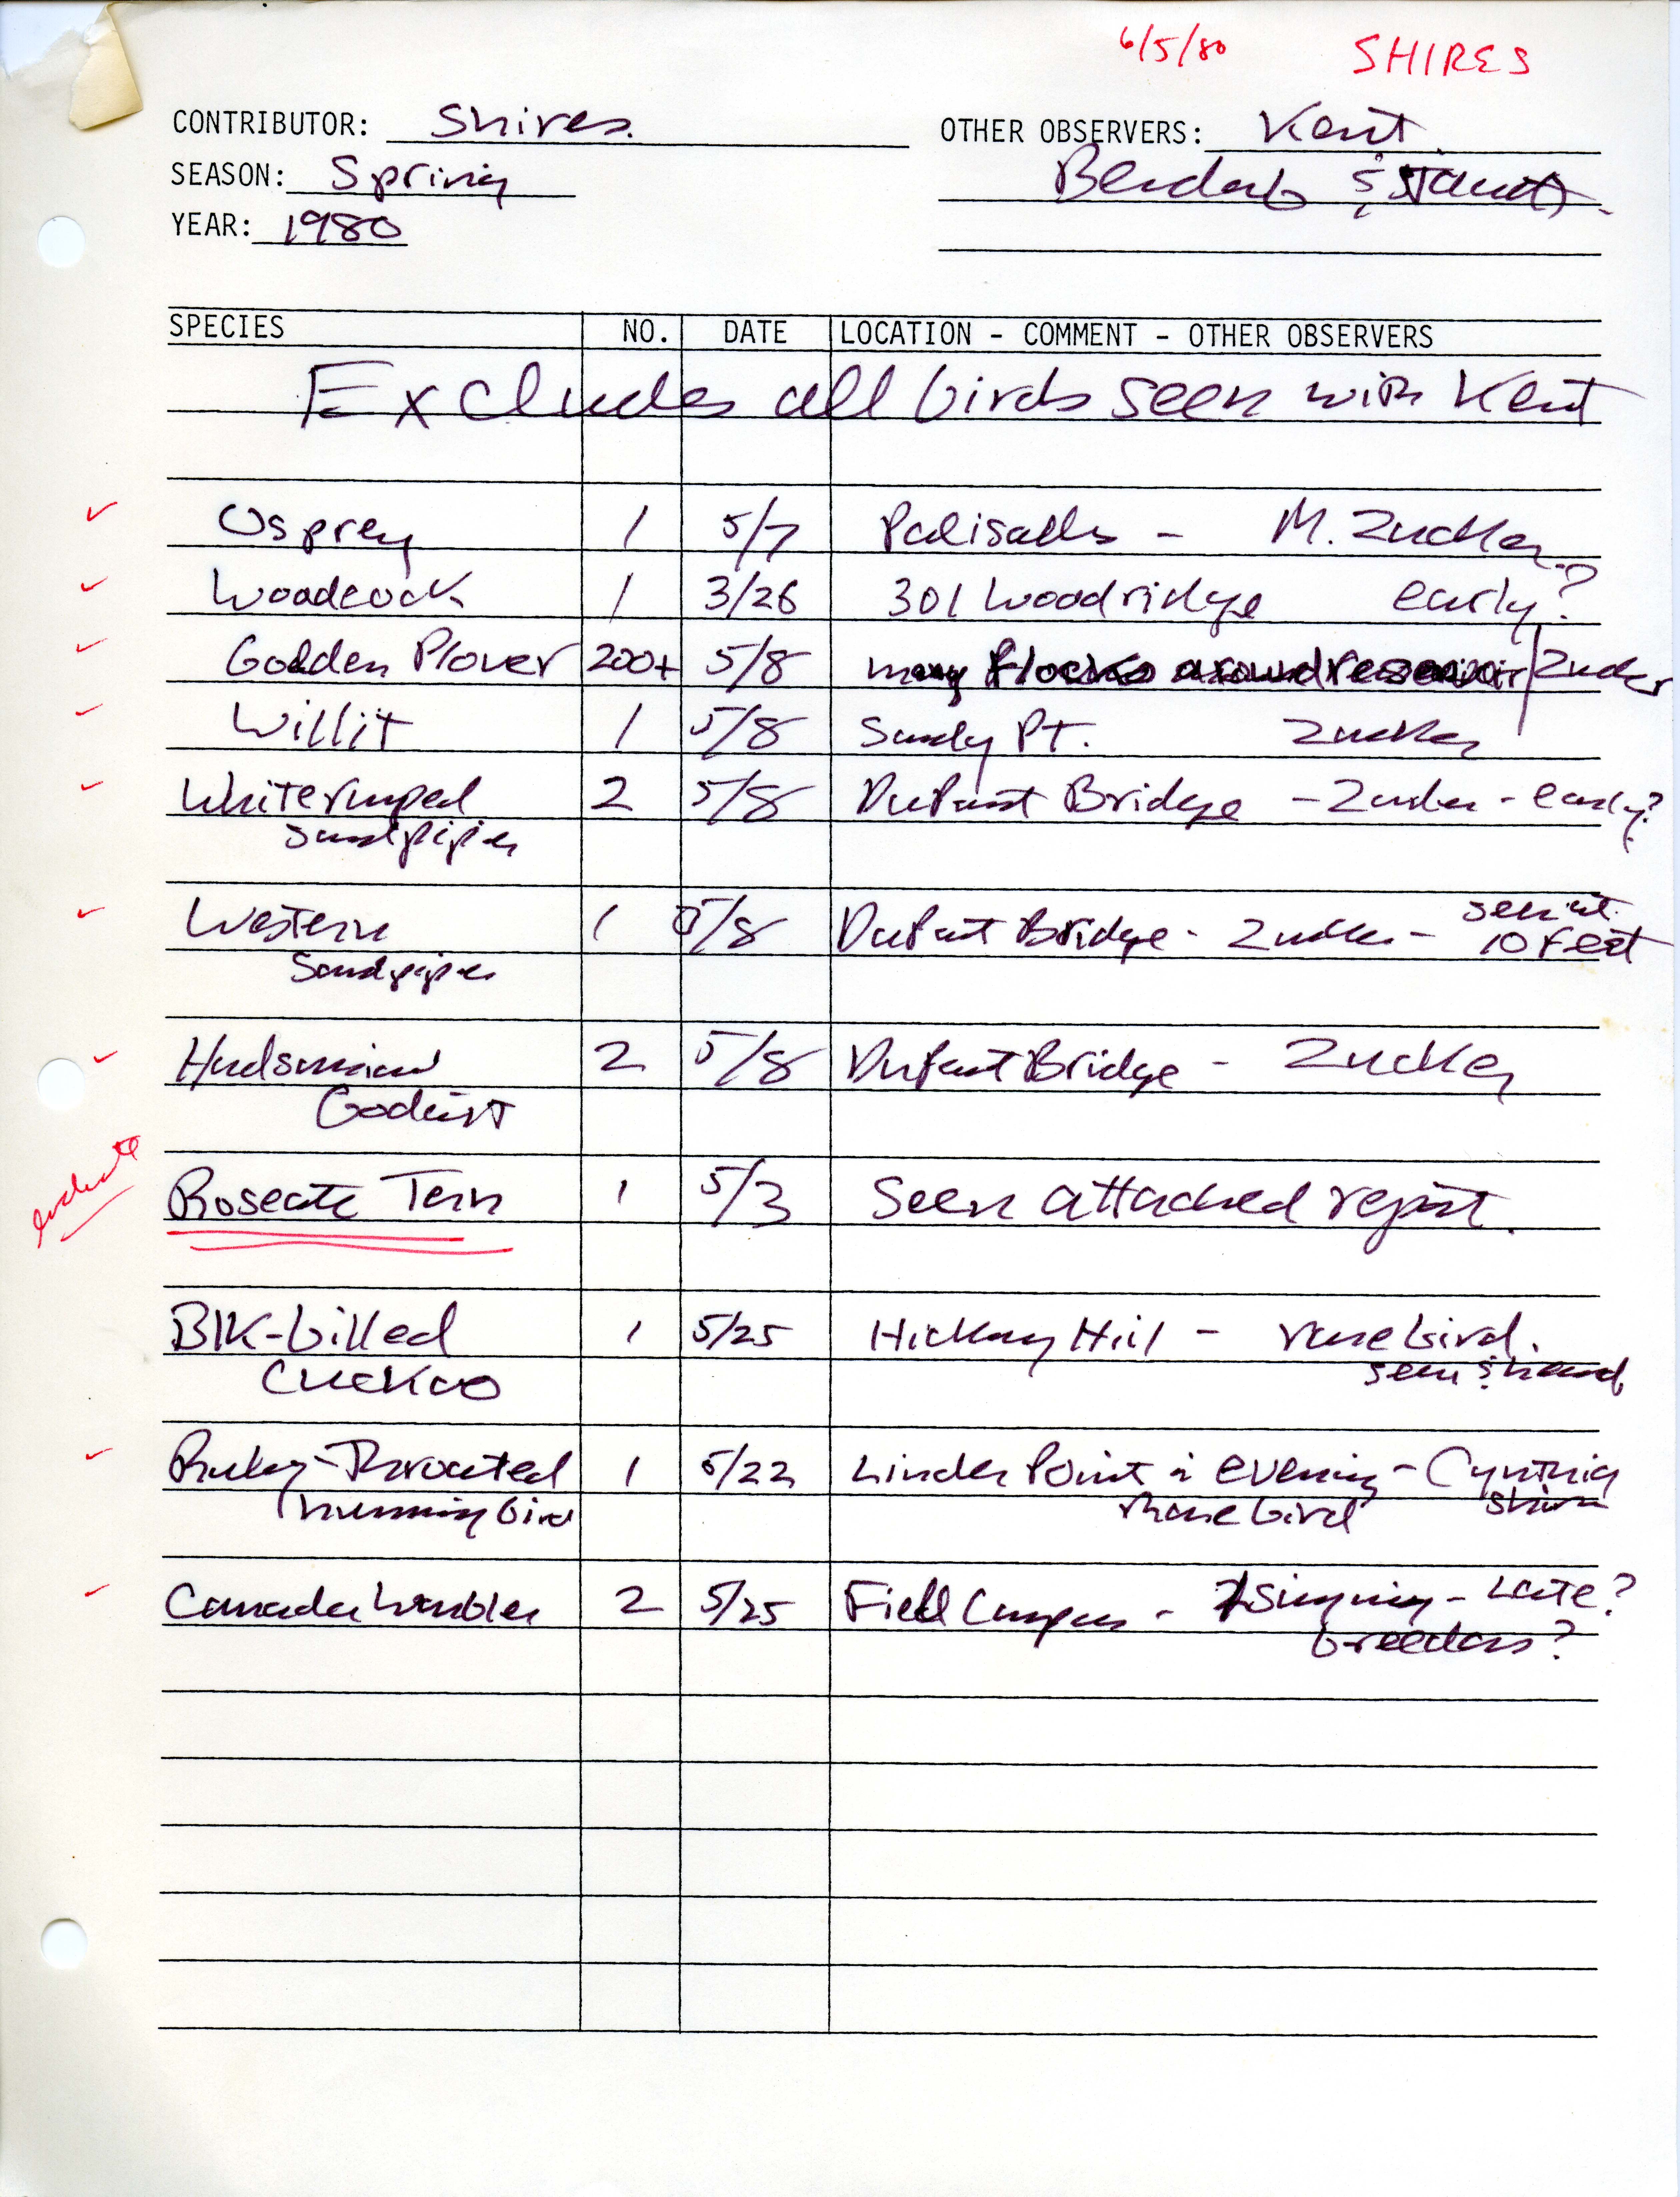 Field notes contributed by Thomas K. Shires, spring 1980